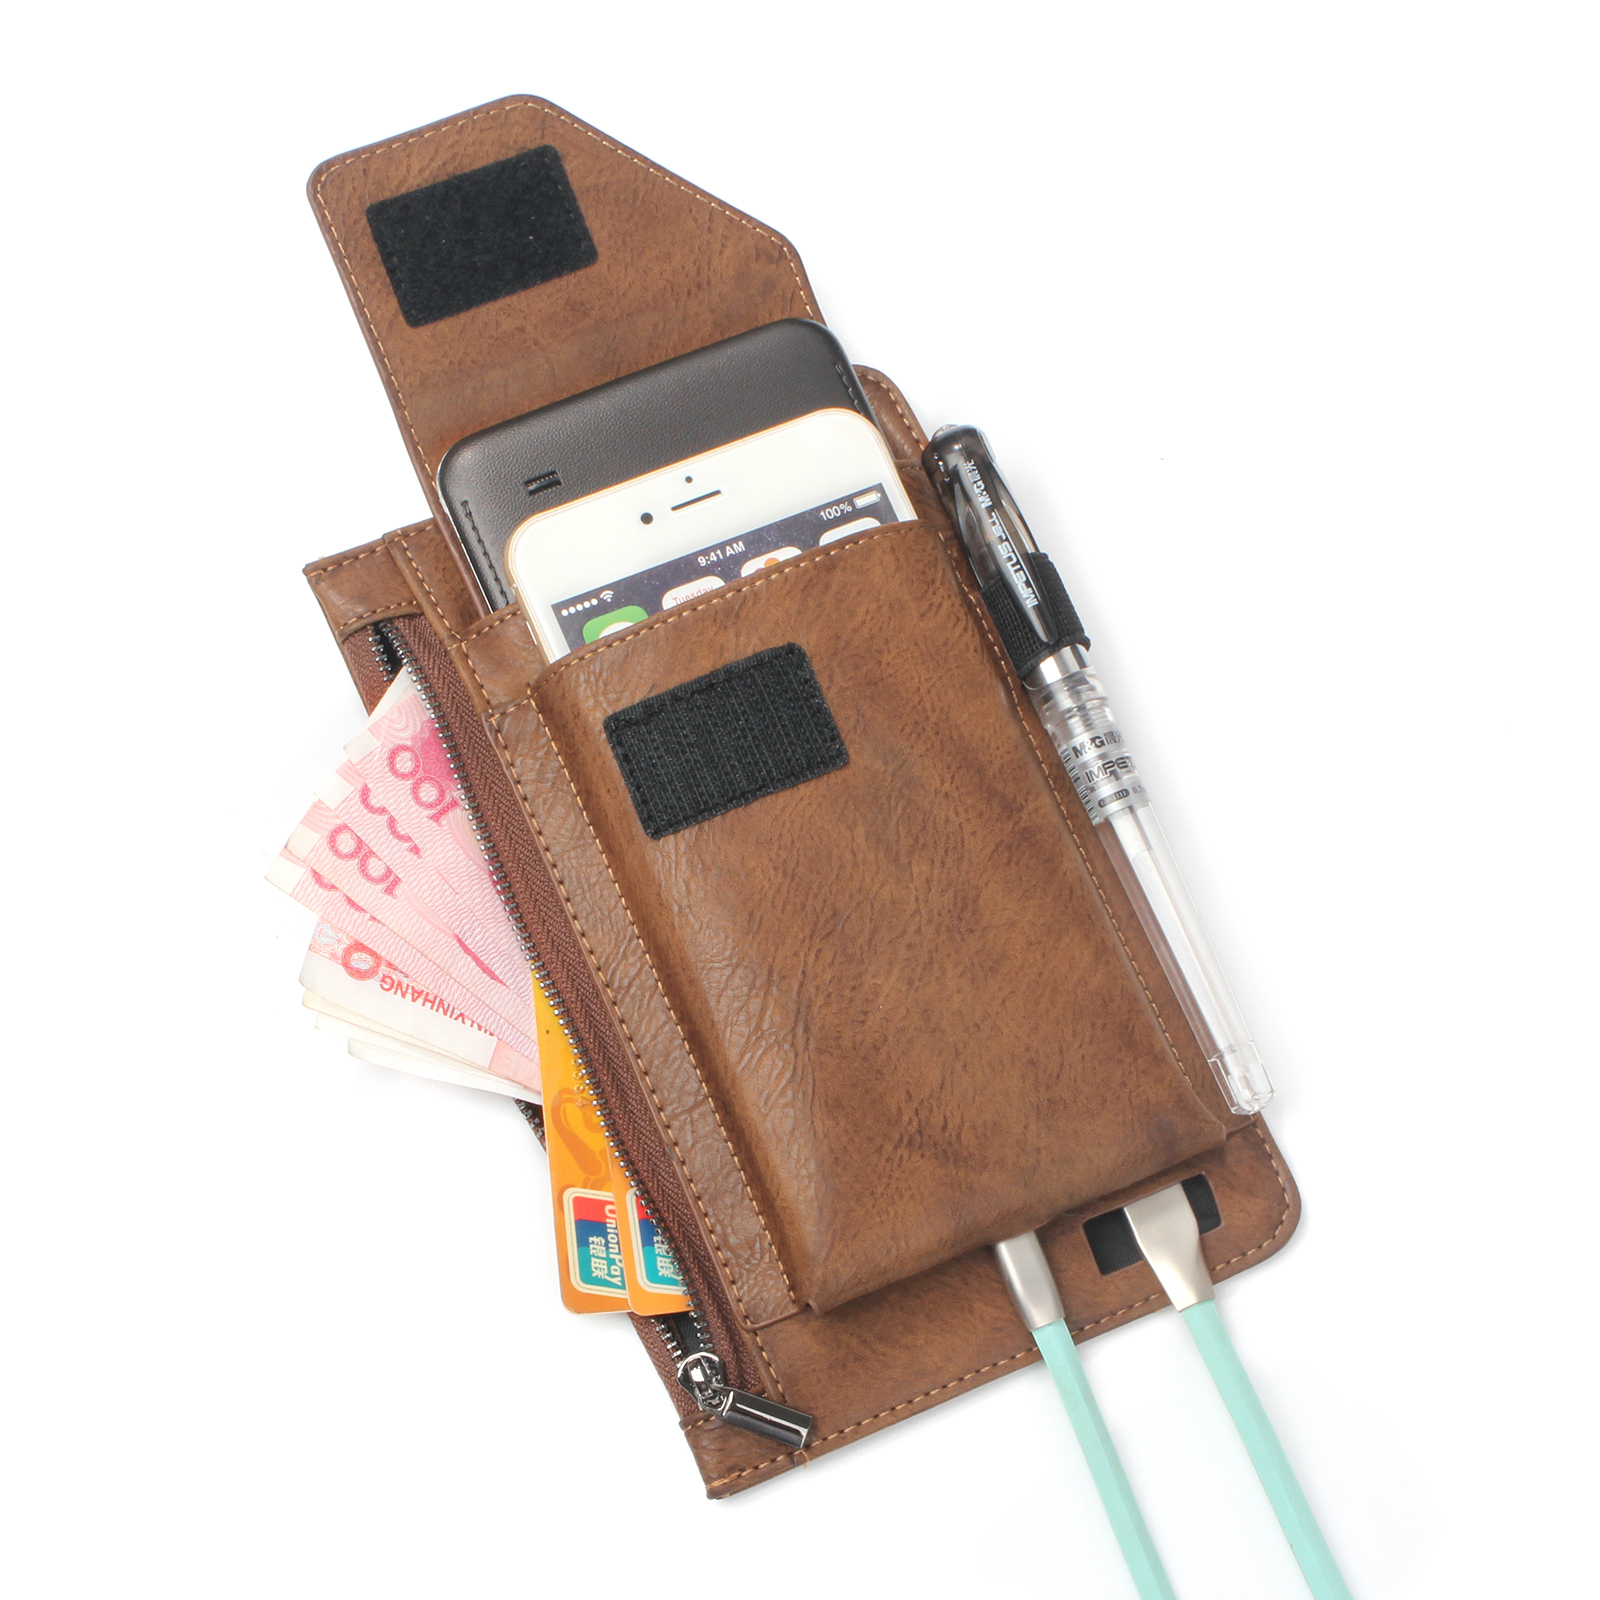 Bakeey-Casual-Vintage-Bussiness-Multi-Pocket-Reserve-Charging-Port-PU-Leather-Mobile-Phone-Money-Hik-1692248-5